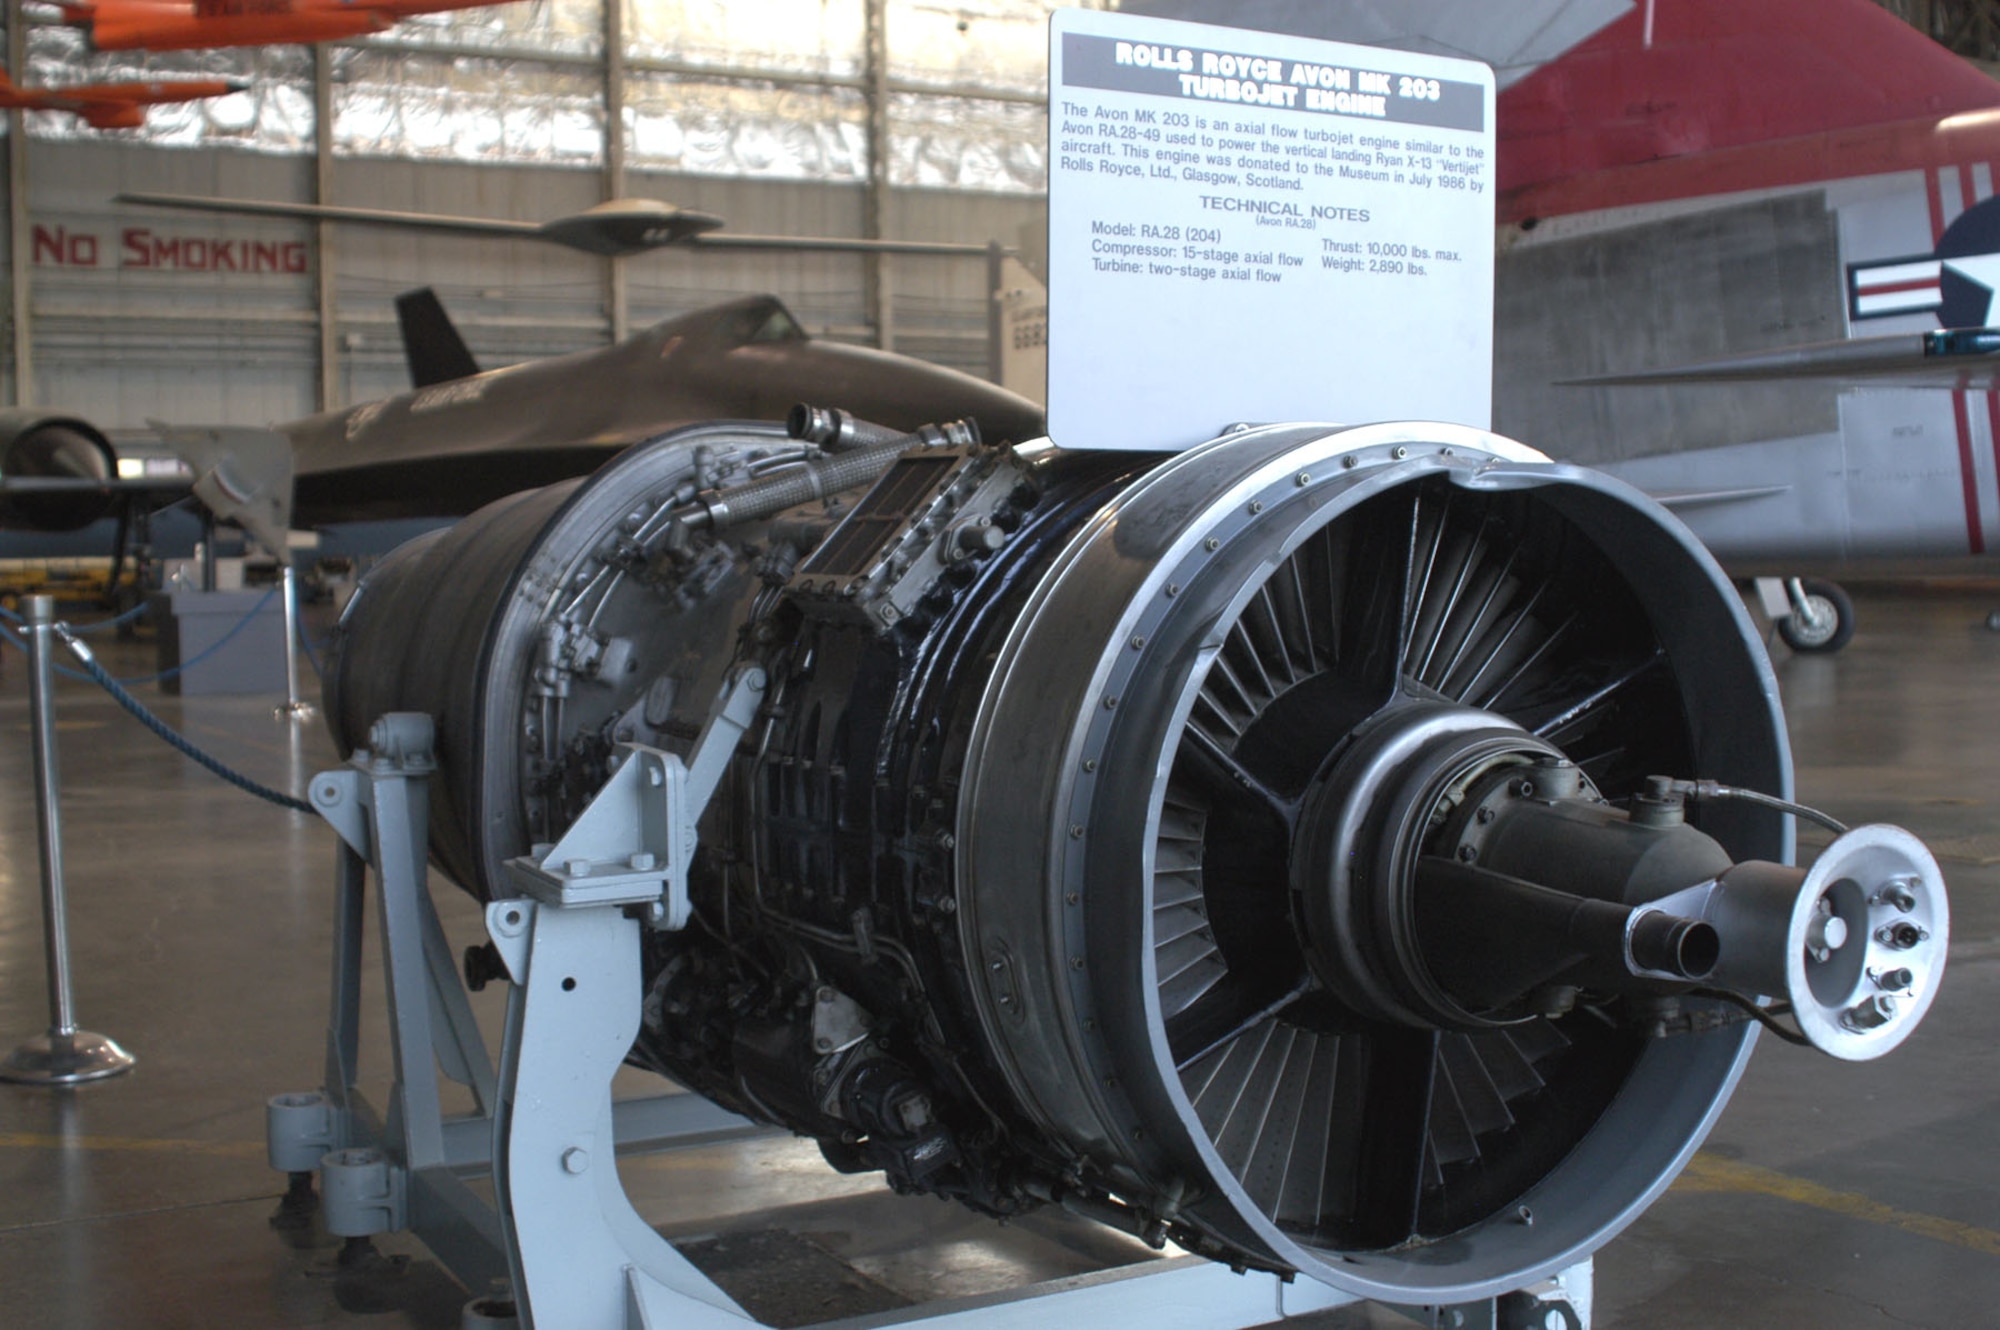 DAYTON, Ohio -- Rolls Royce Avon MK 203 on display in the Research & Development Gallery at the National Museum of the United States Air Force. (U.S. Air Force photo)